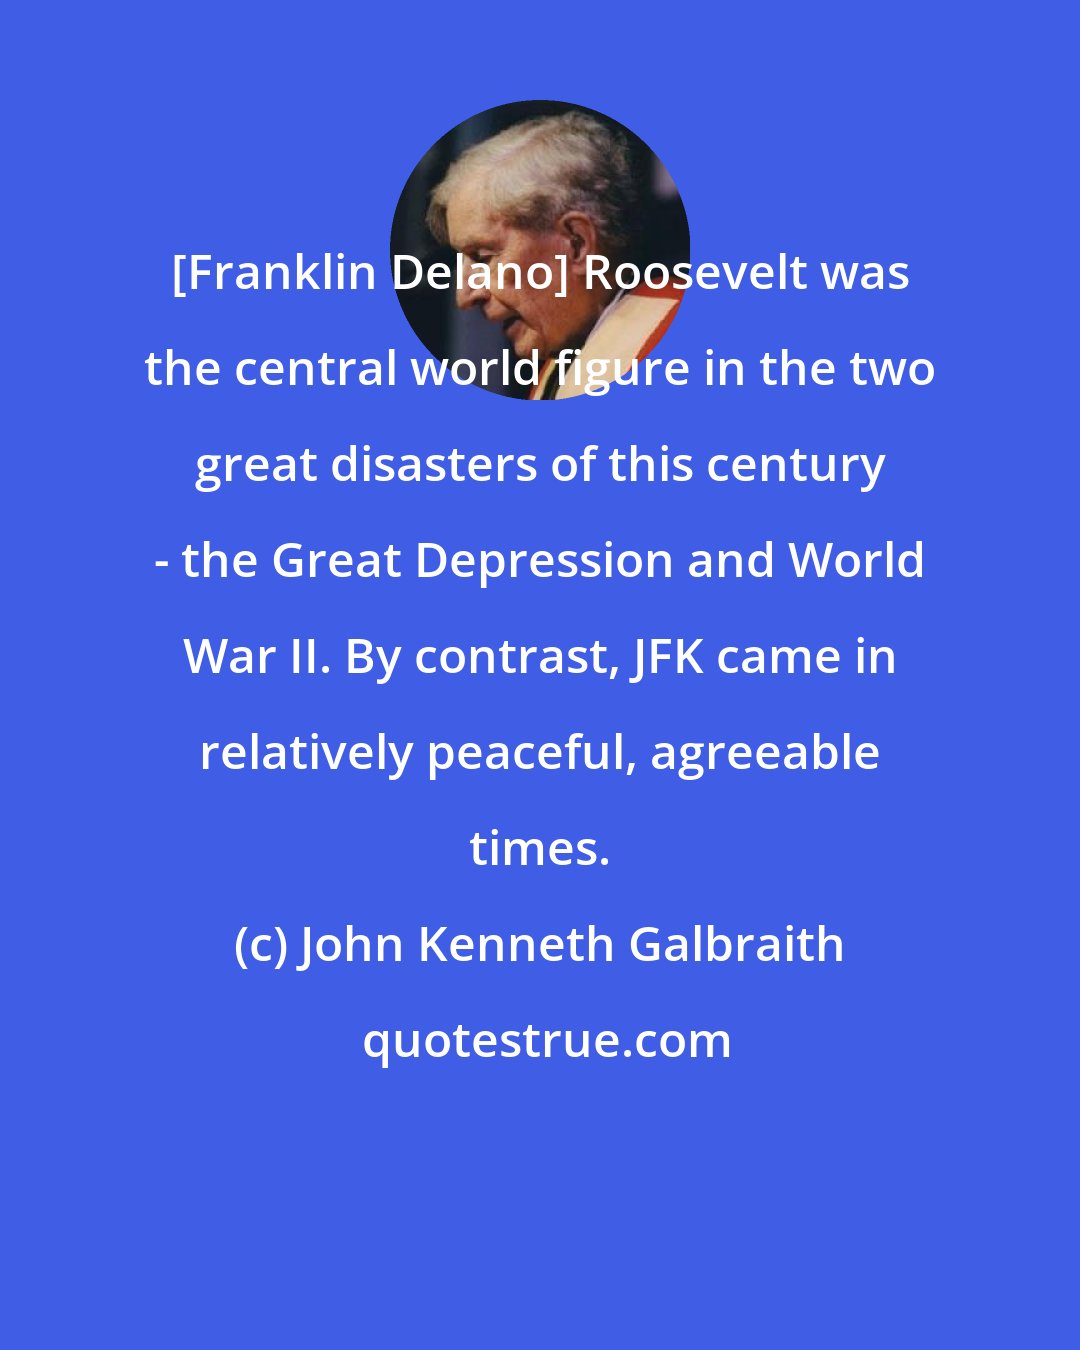 John Kenneth Galbraith: [Franklin Delano] Roosevelt was the central world figure in the two great disasters of this century - the Great Depression and World War II. By contrast, JFK came in relatively peaceful, agreeable times.